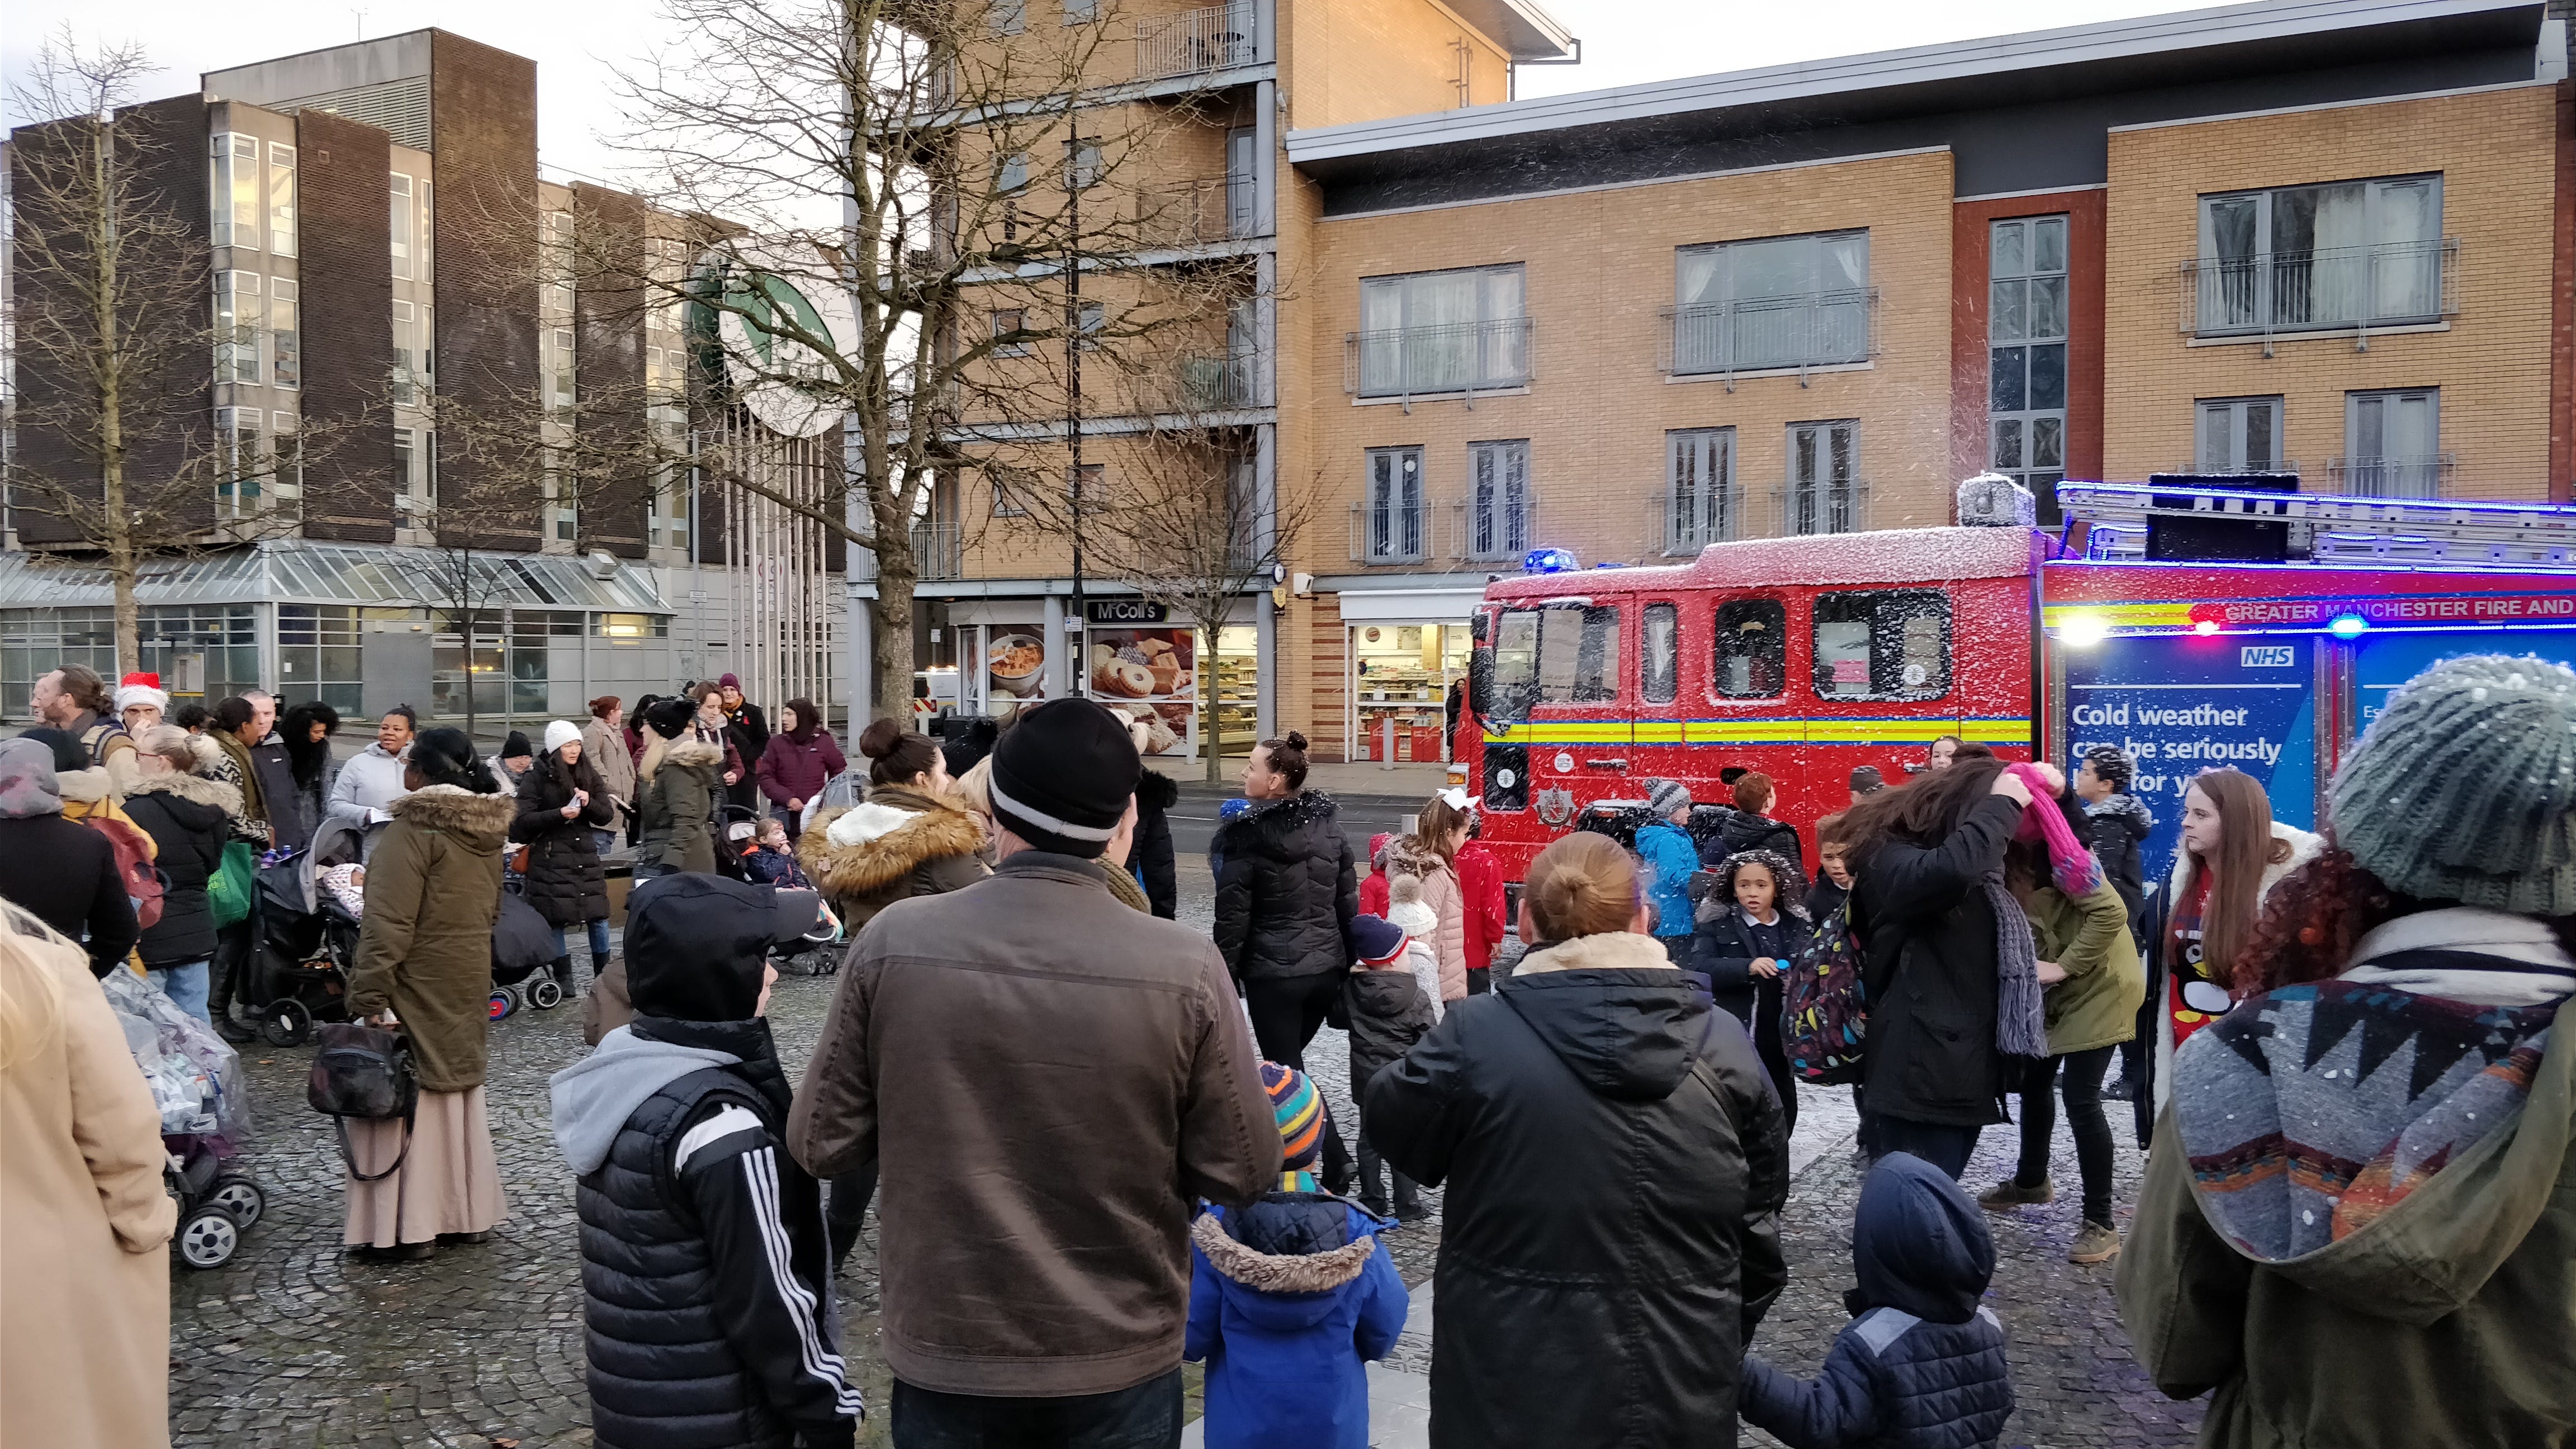 a crowd gathered outside near a fire engine with artificial snow